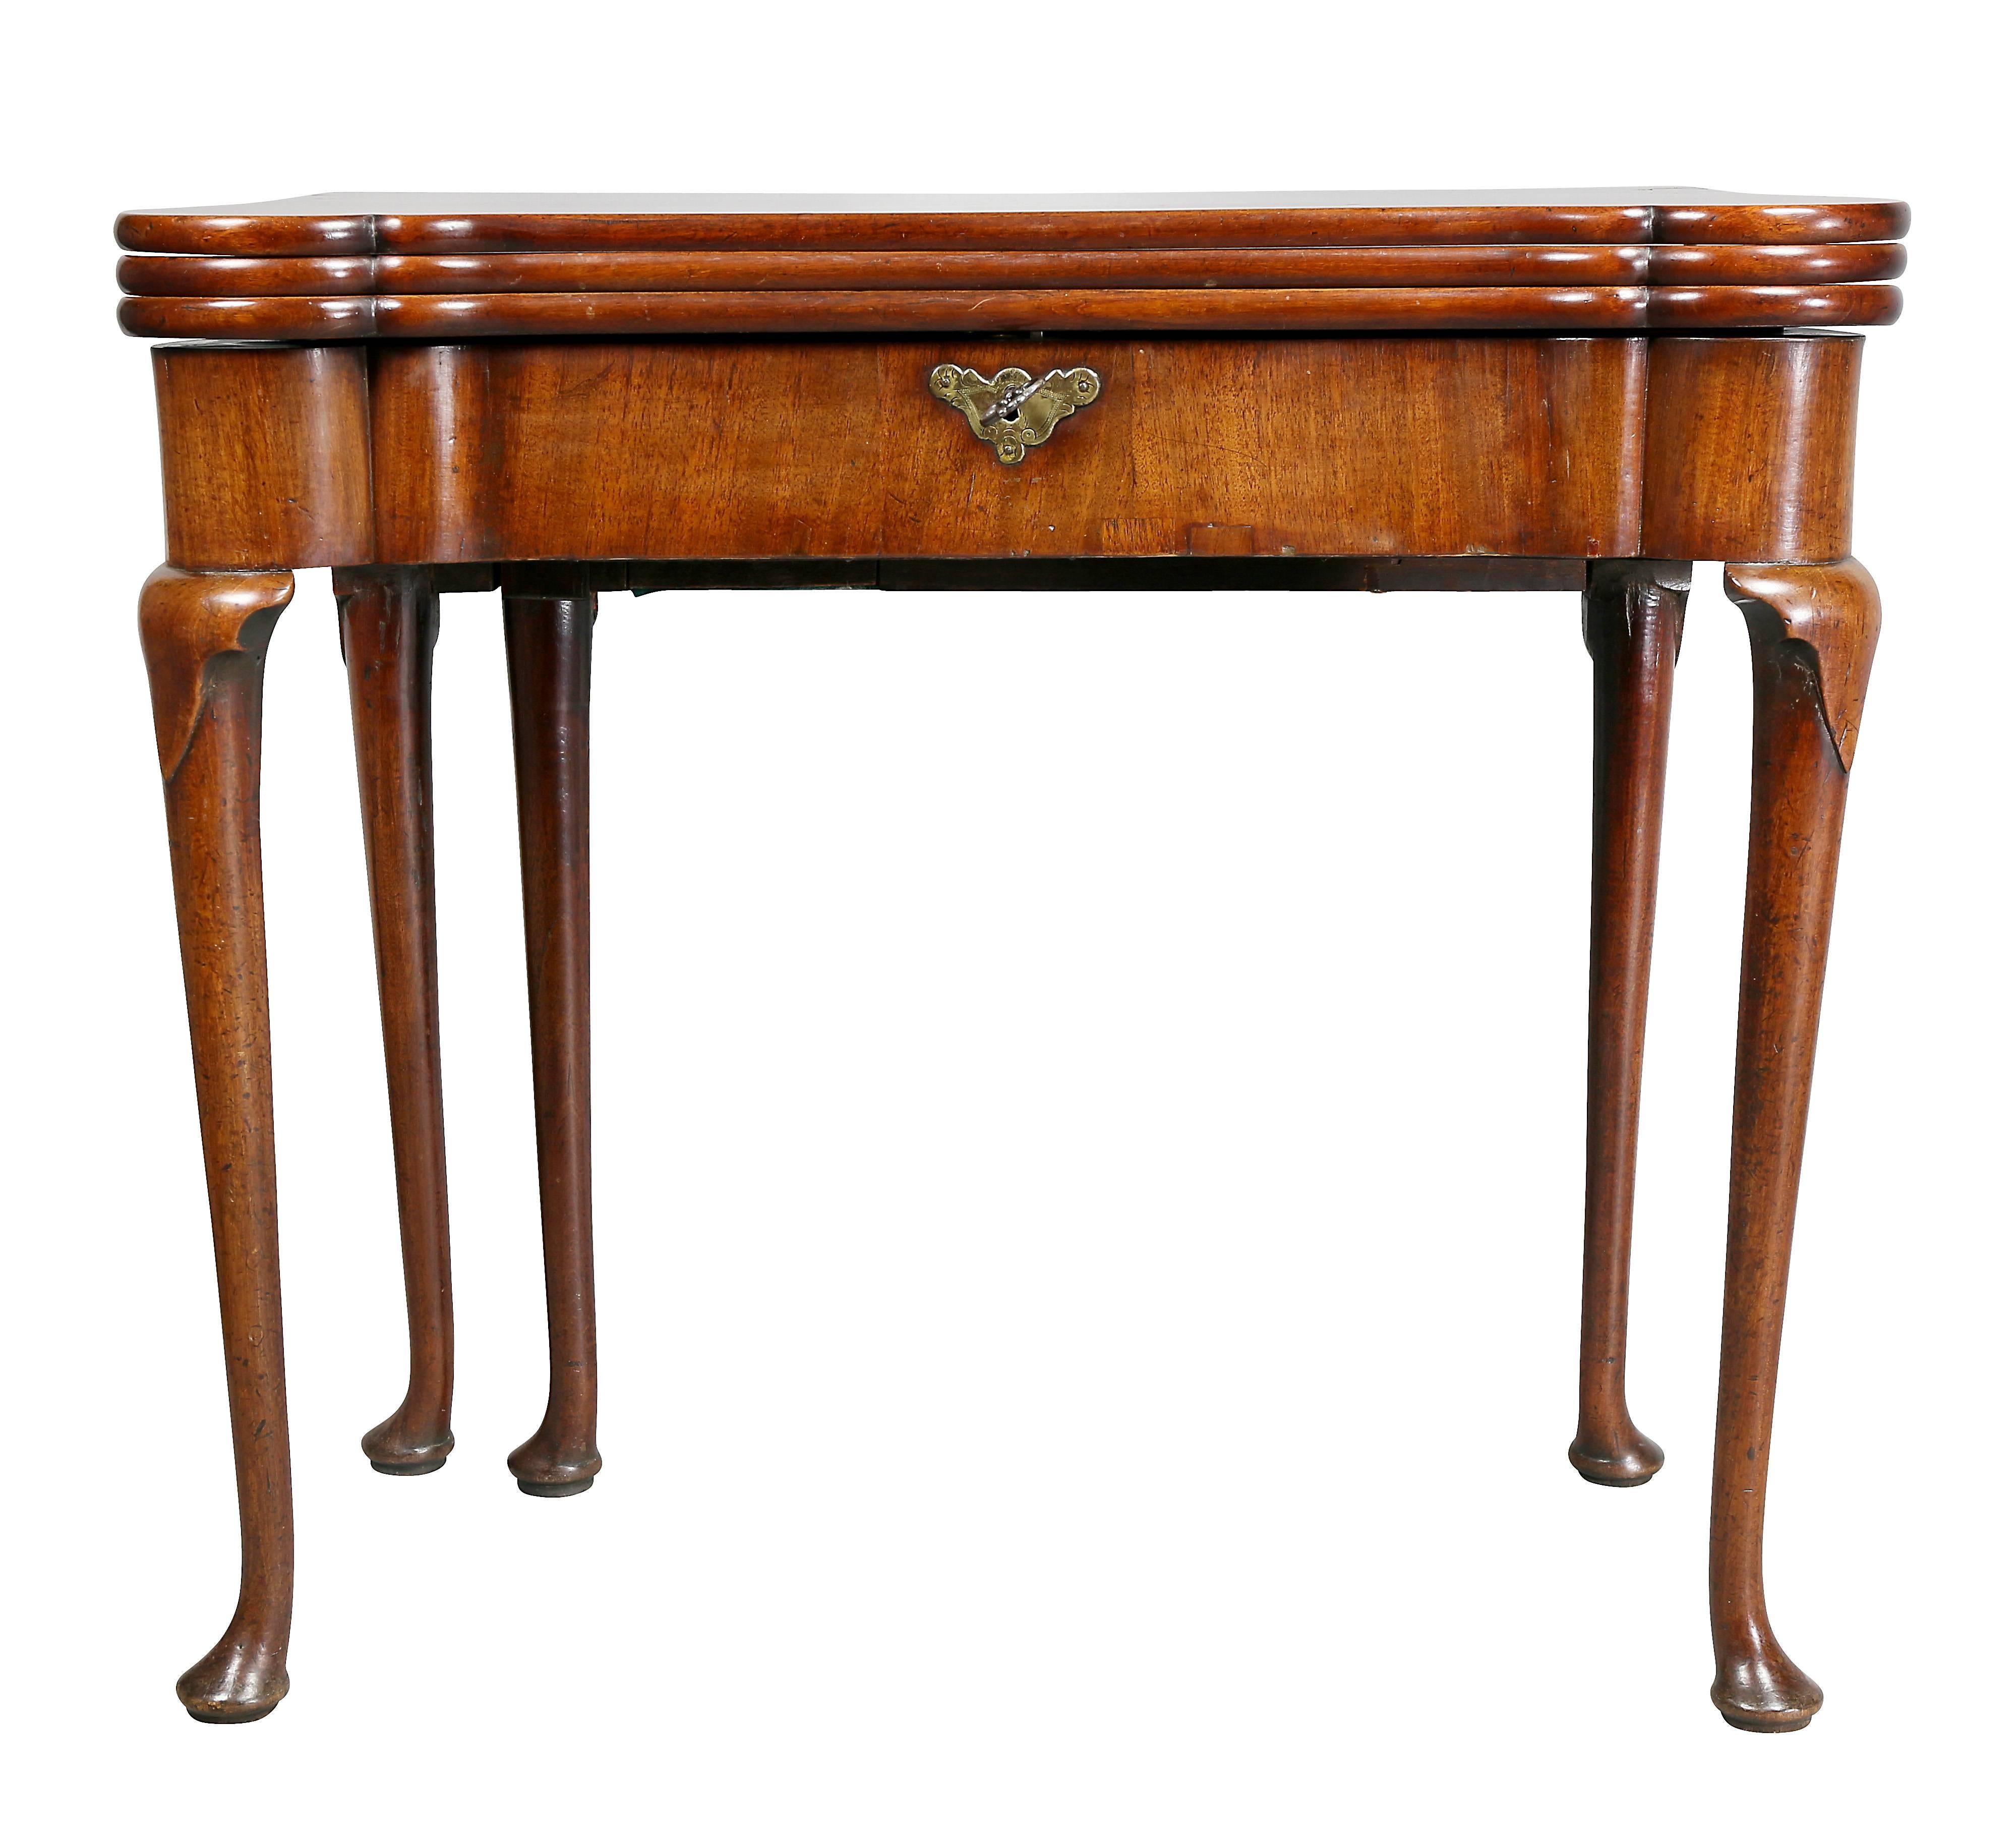 With triple hinged top with turret corners opening to a fitted card surface and backgammon, ratcheted reading stand and swing out inkstand, raised on slight cabriole legs and pad feet.